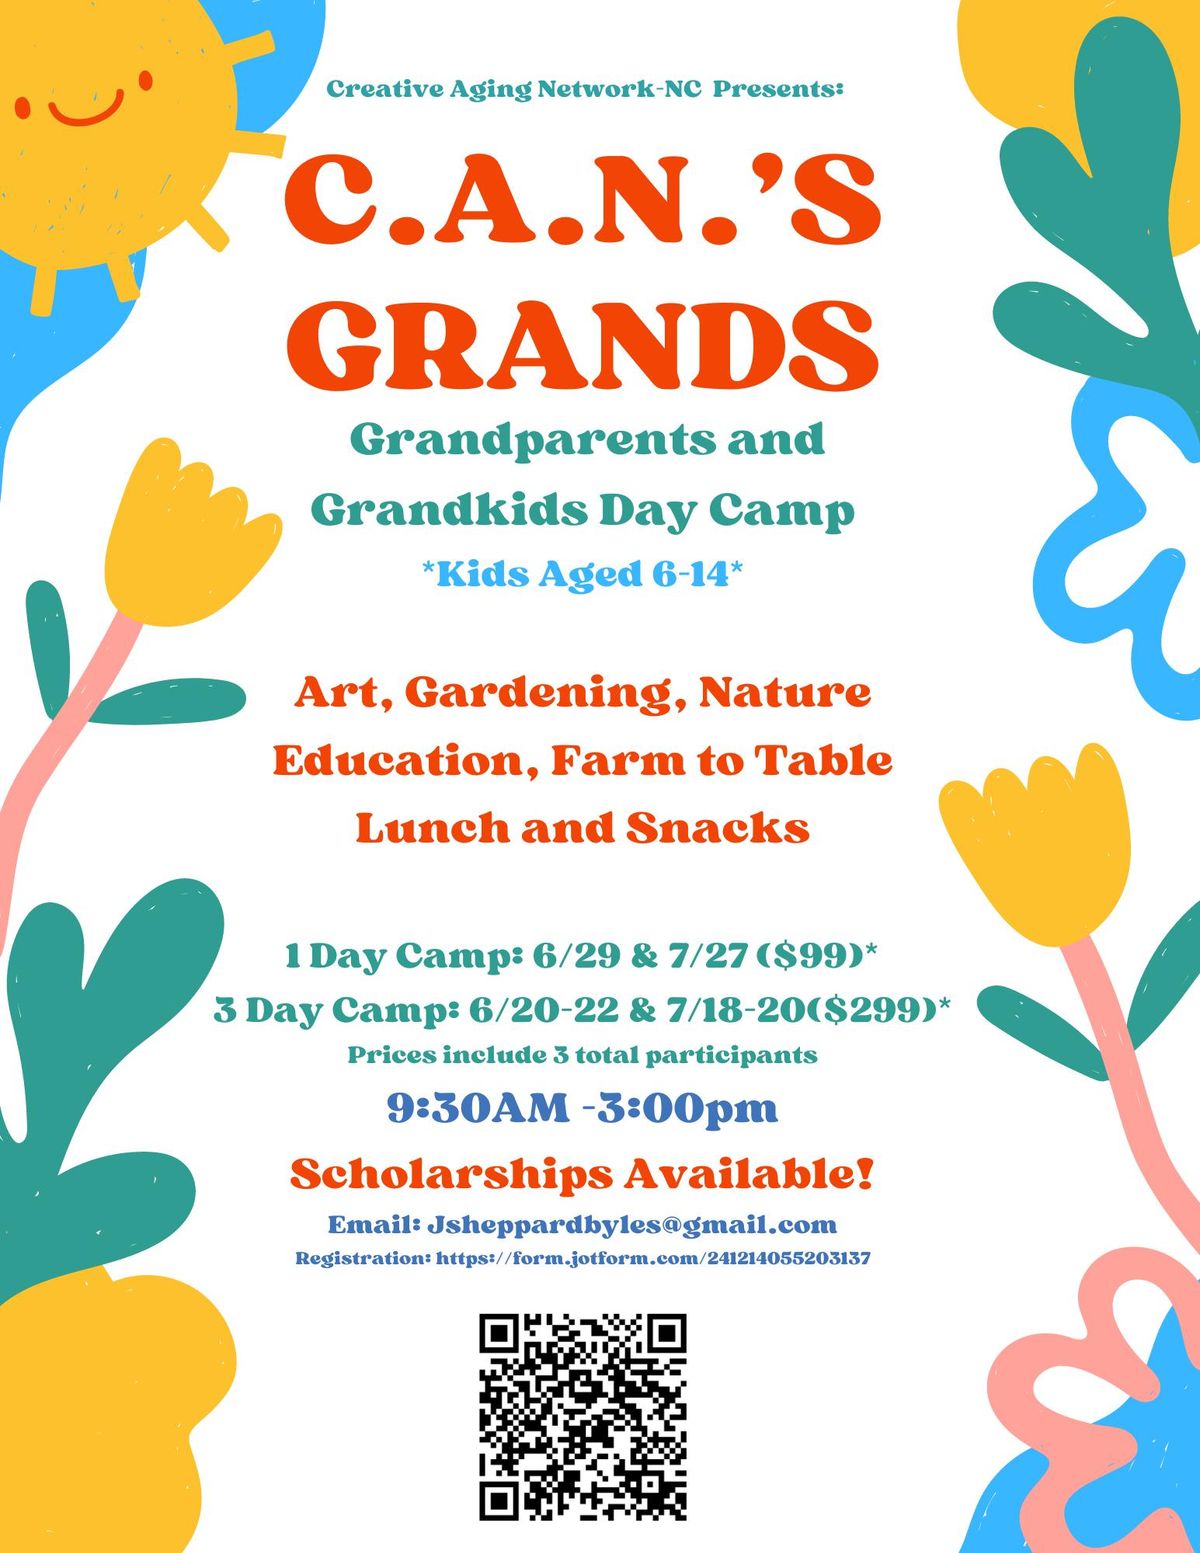 CAN's Grands - Grandparents and Grandkids Day Camps